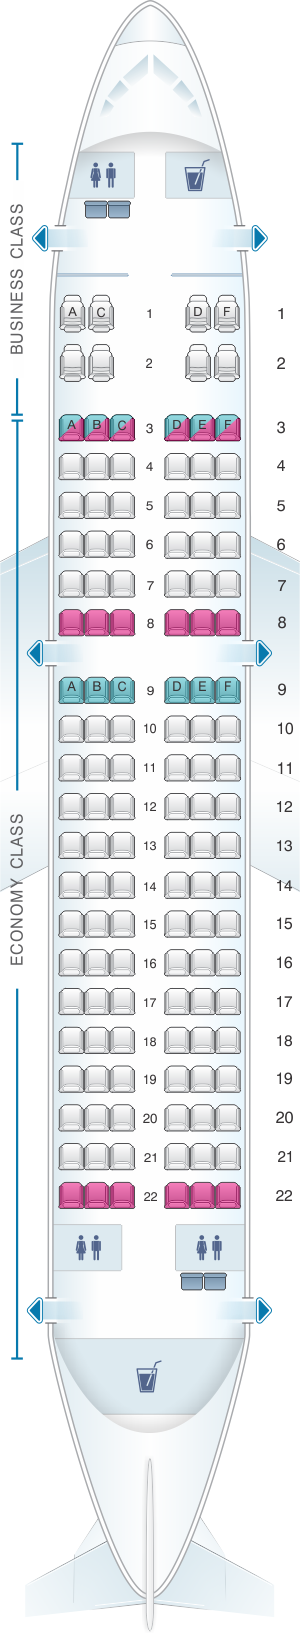 Seat map for Rossiya Airlines Airbus A319 128PAX